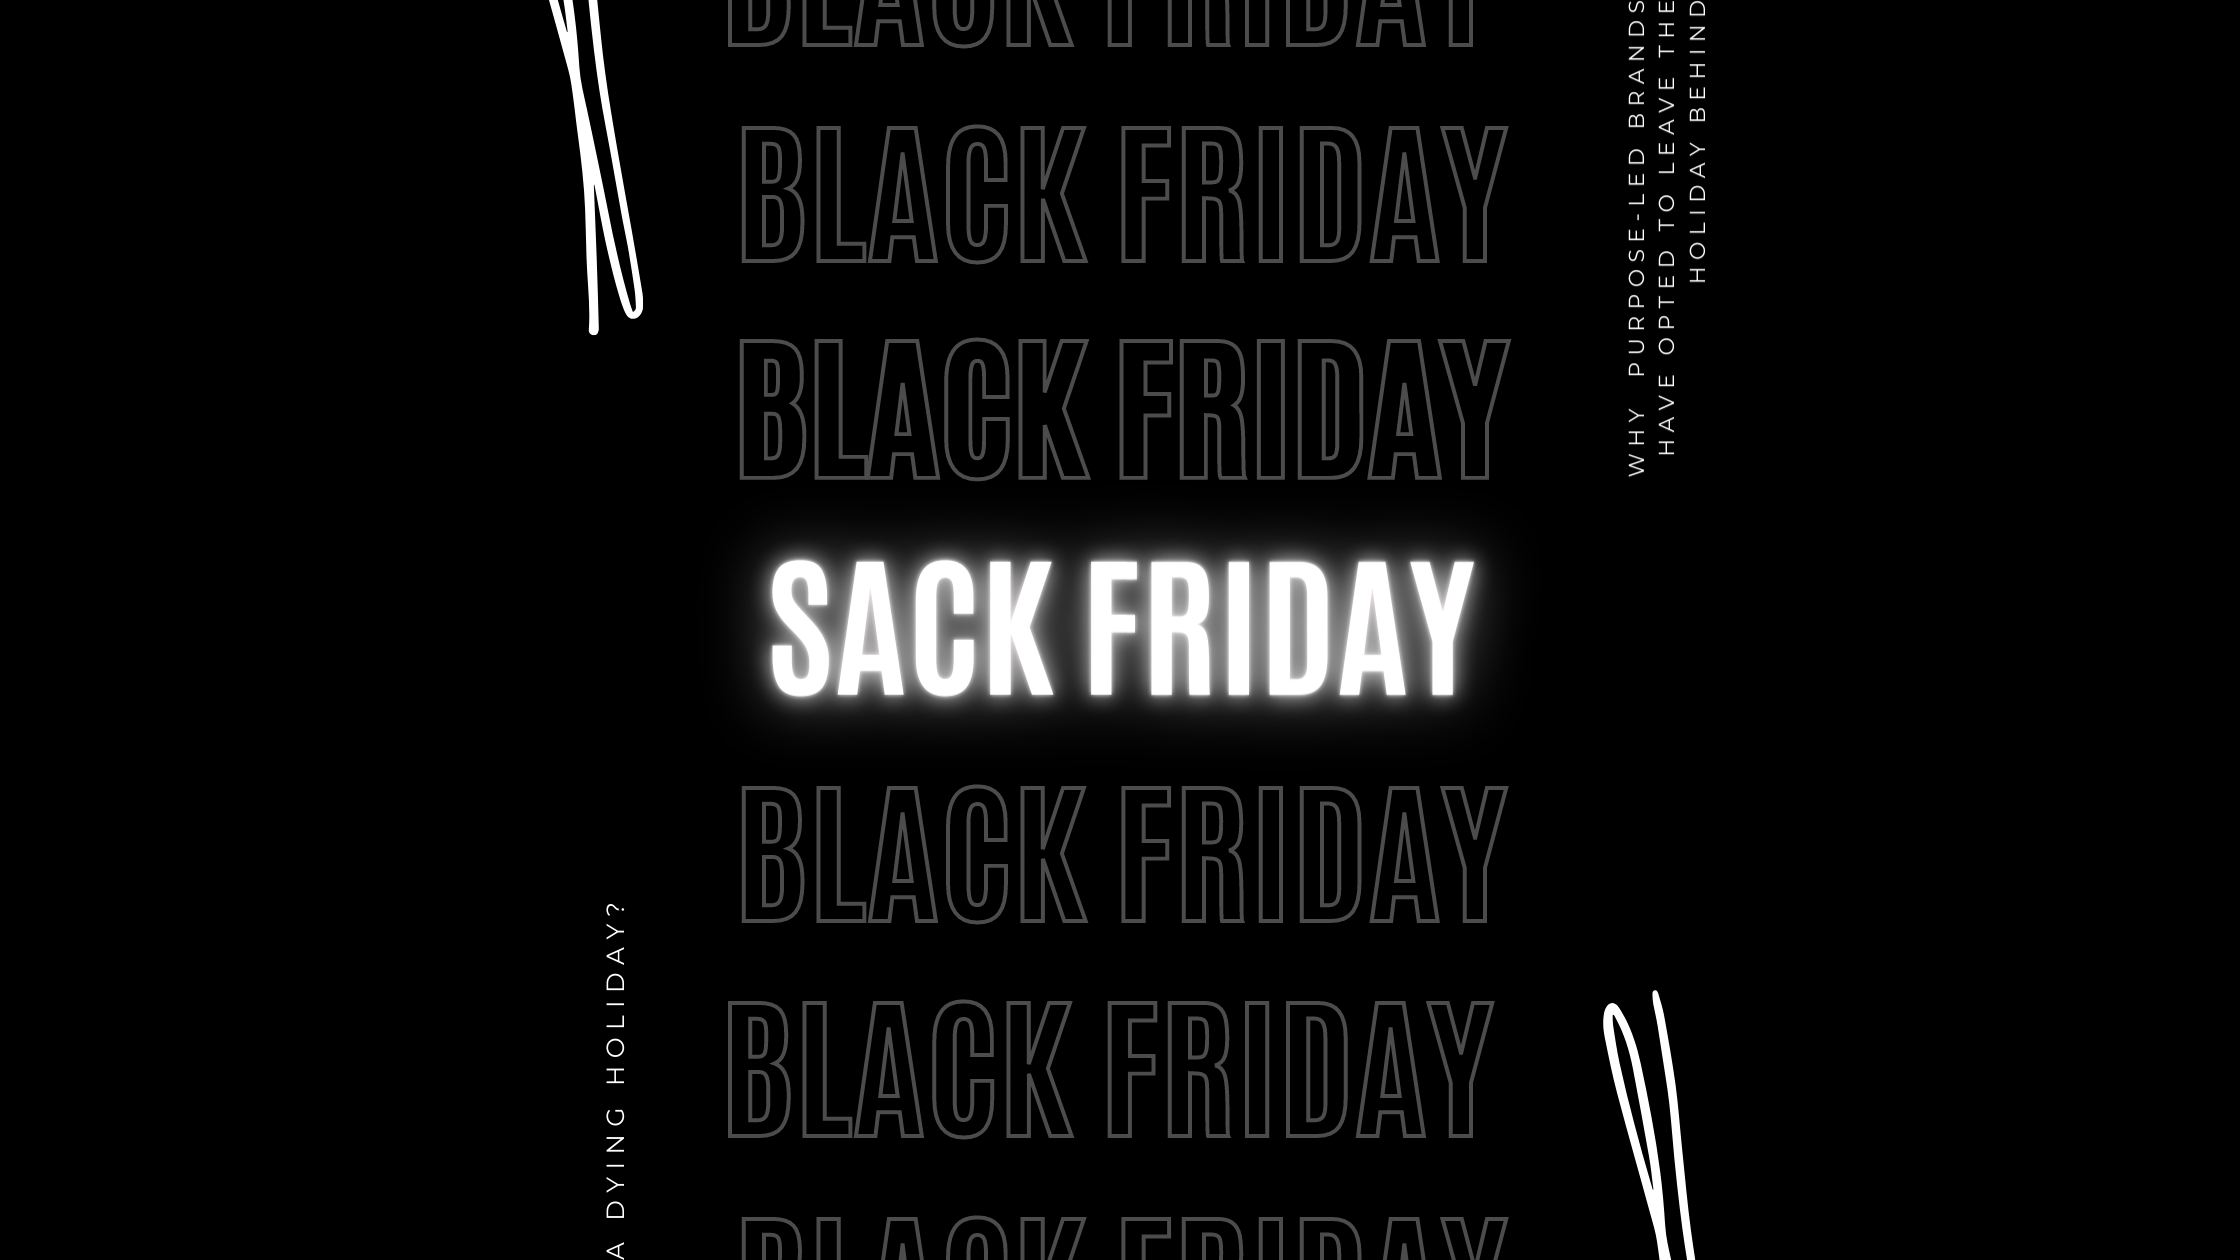 Sack Friday? Why Black Friday Is A Dying Holiday